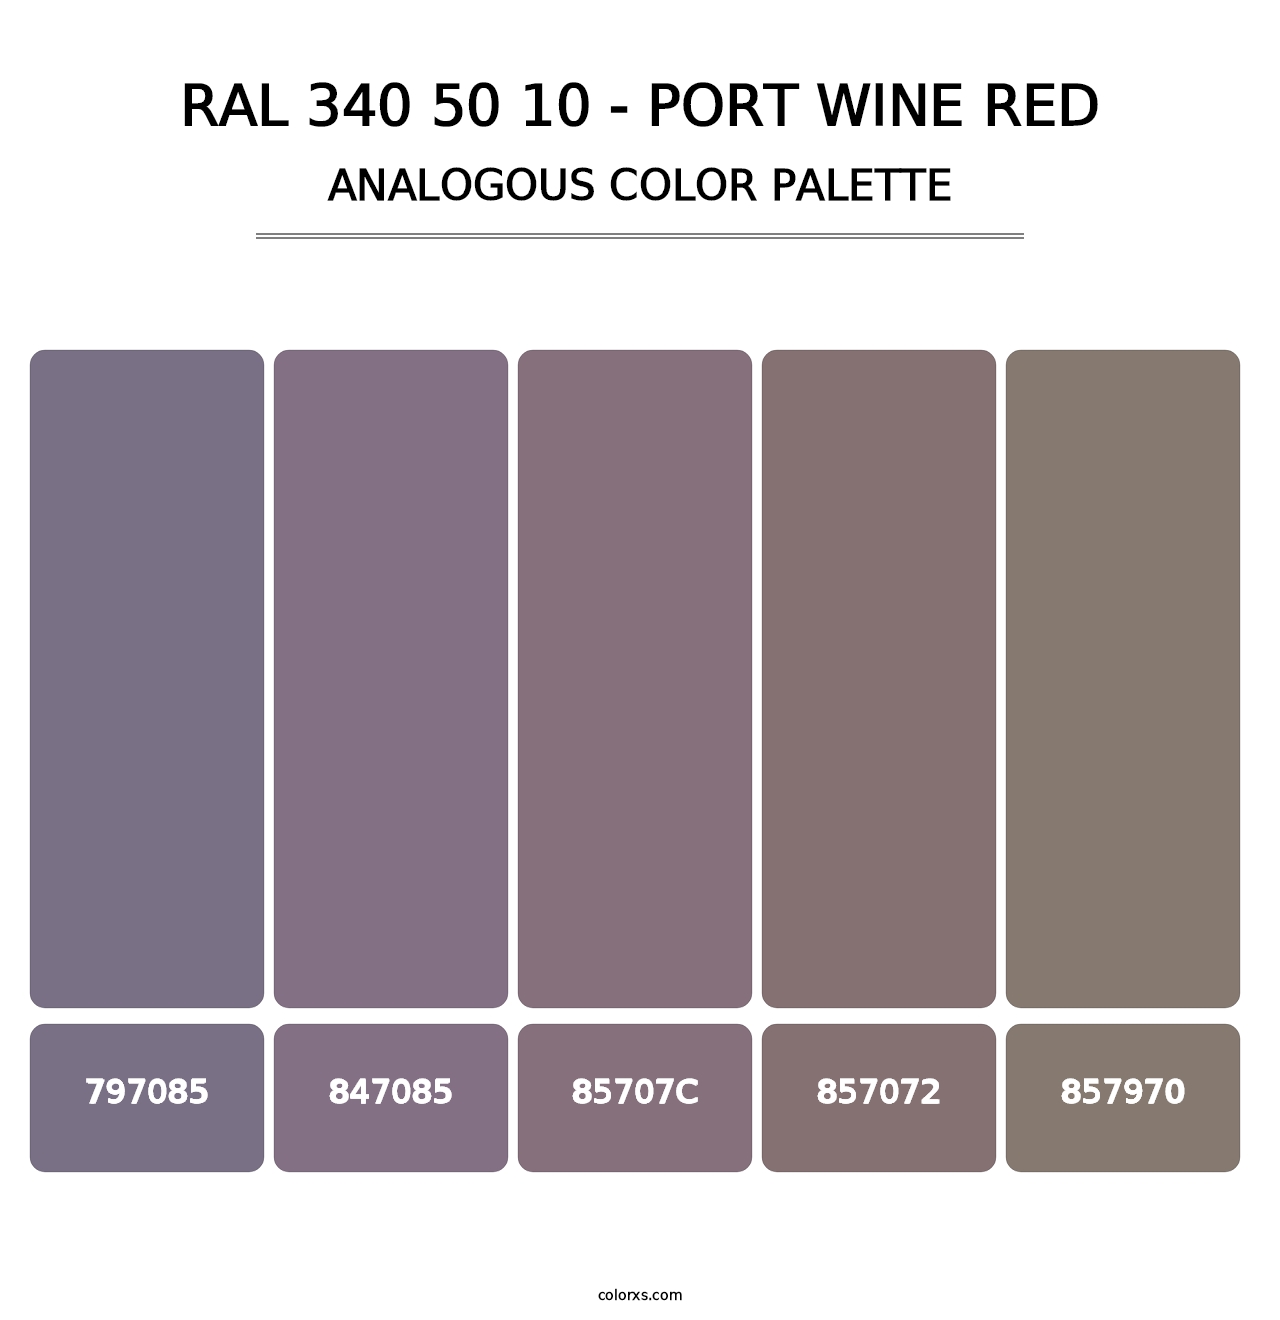 RAL 340 50 10 - Port Wine Red - Analogous Color Palette